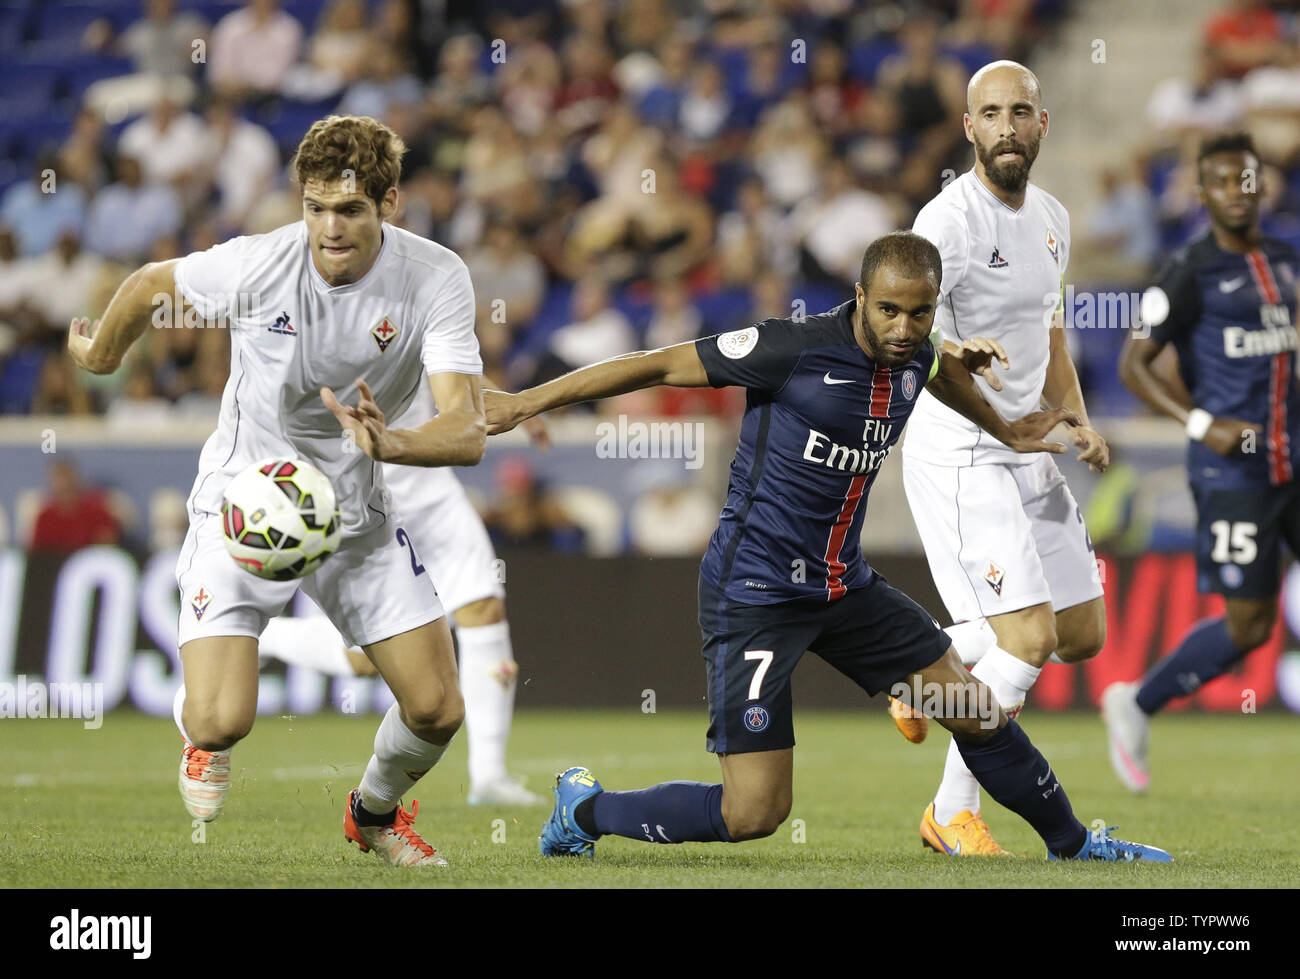 Paris Saint-Germain Lucas Moura and ACF Fiorentina Marcos Alonso battle for  the ball at the 2015 International Champions Cup North America at Red Bull  Arena in Harrison, NJ on July 21, 2015.